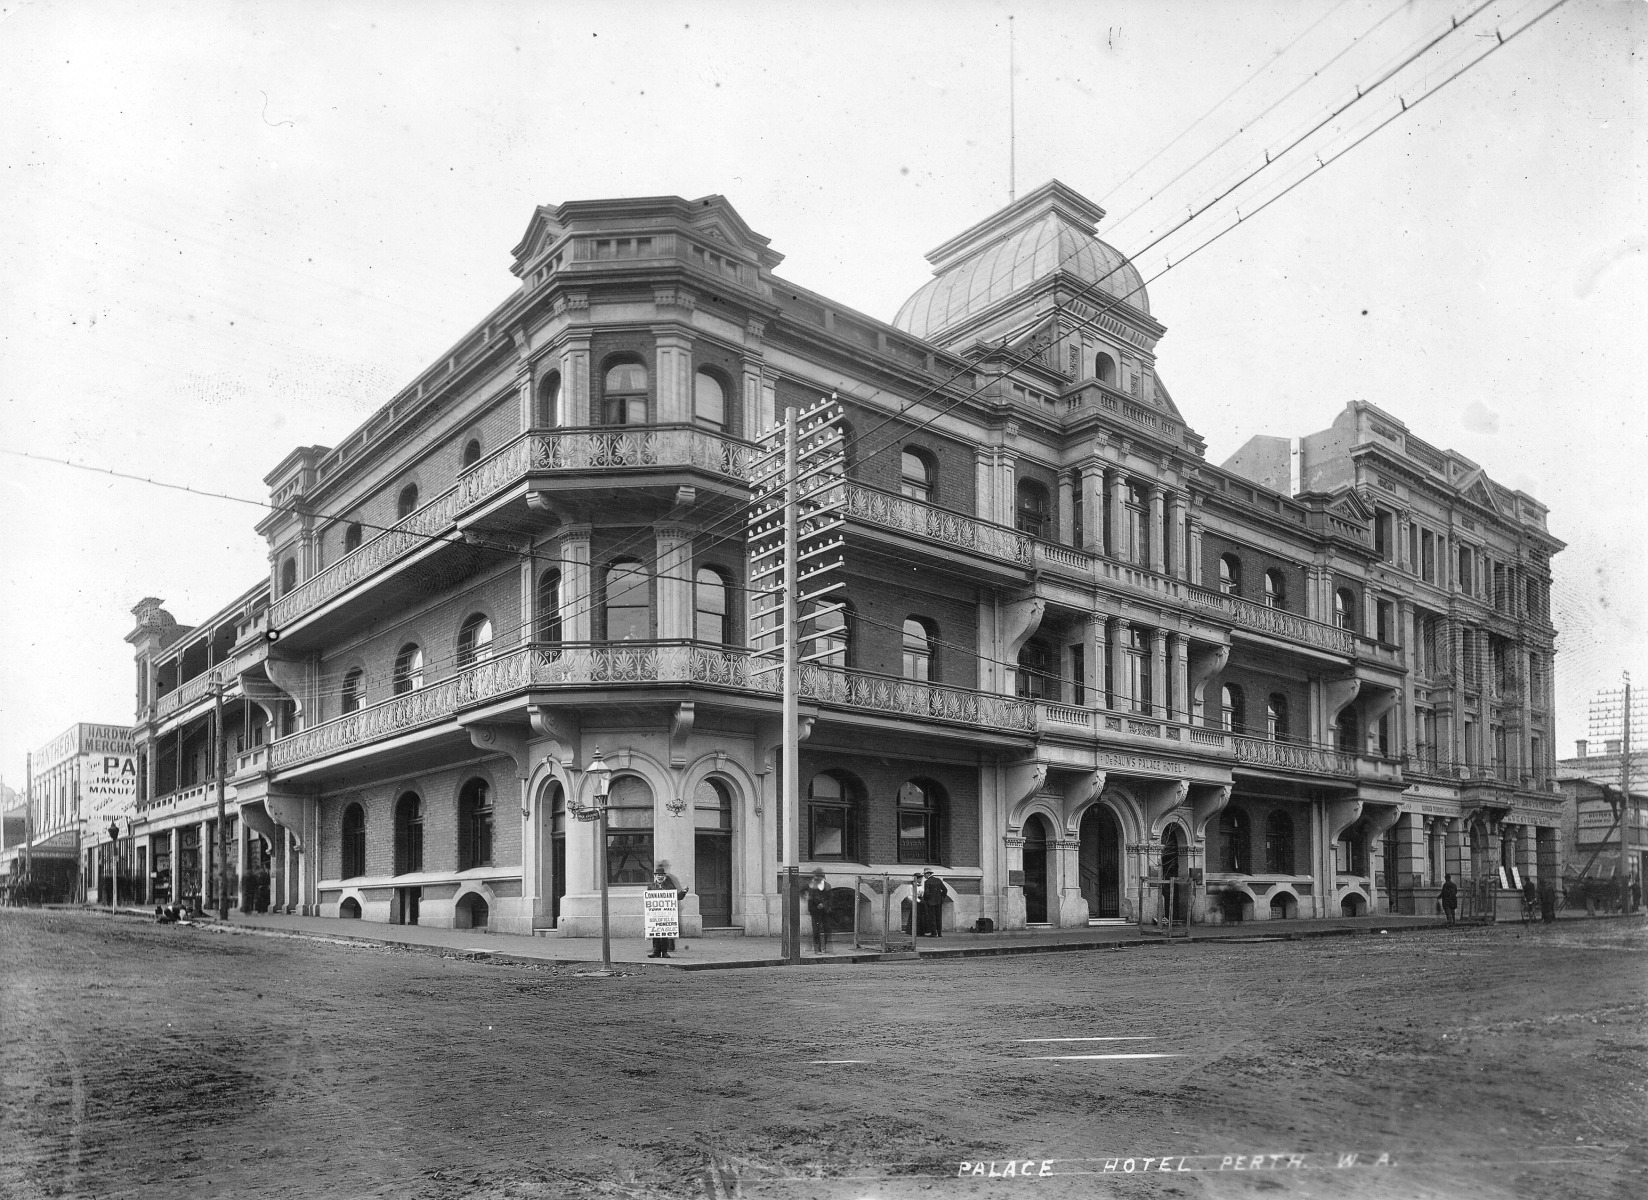 A heritage photo of the Palace Hotel in 1897 soon after completion.